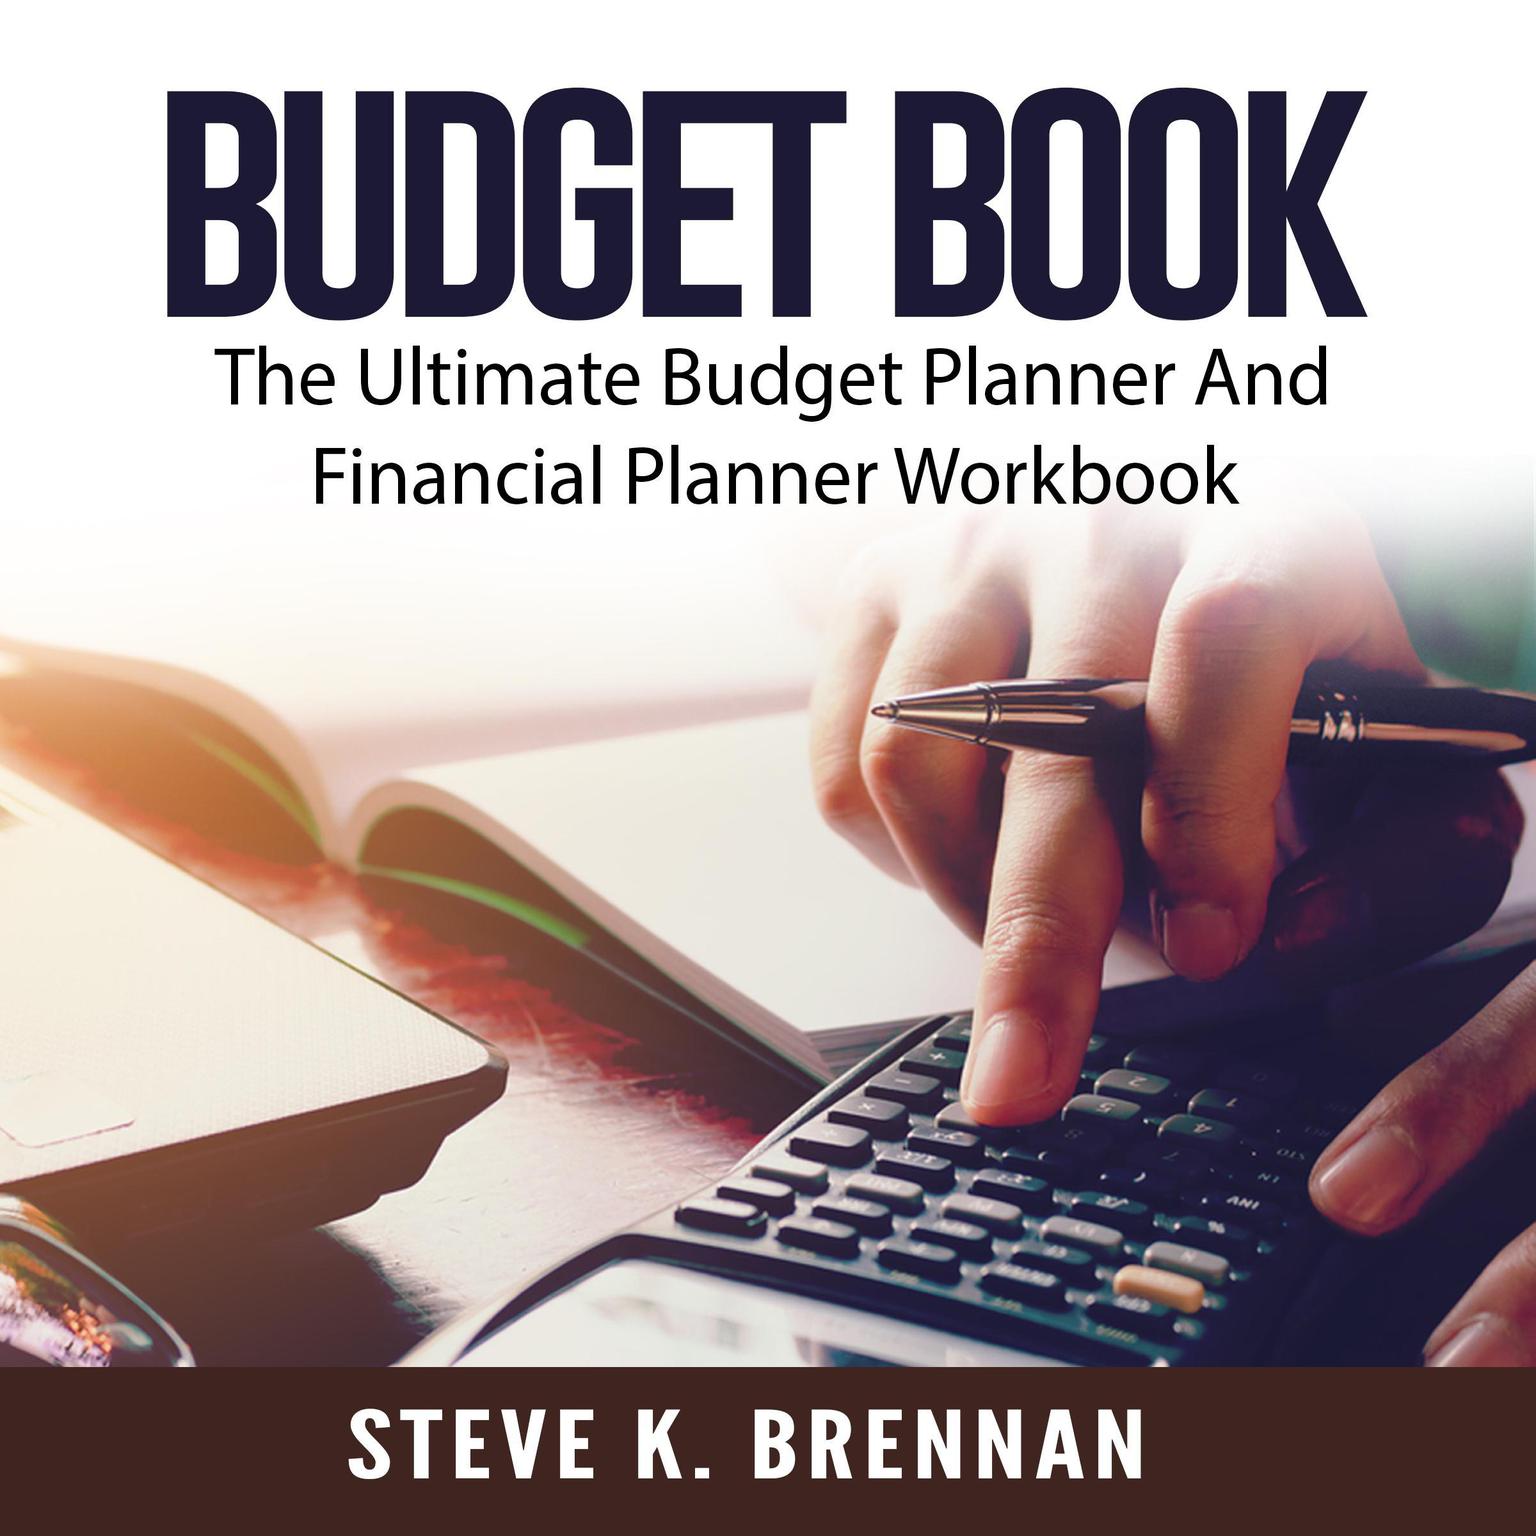 Budget Book: The Ultimate Budget Planner And Financial Planner Workbook Audiobook, by Steve K. Brennan